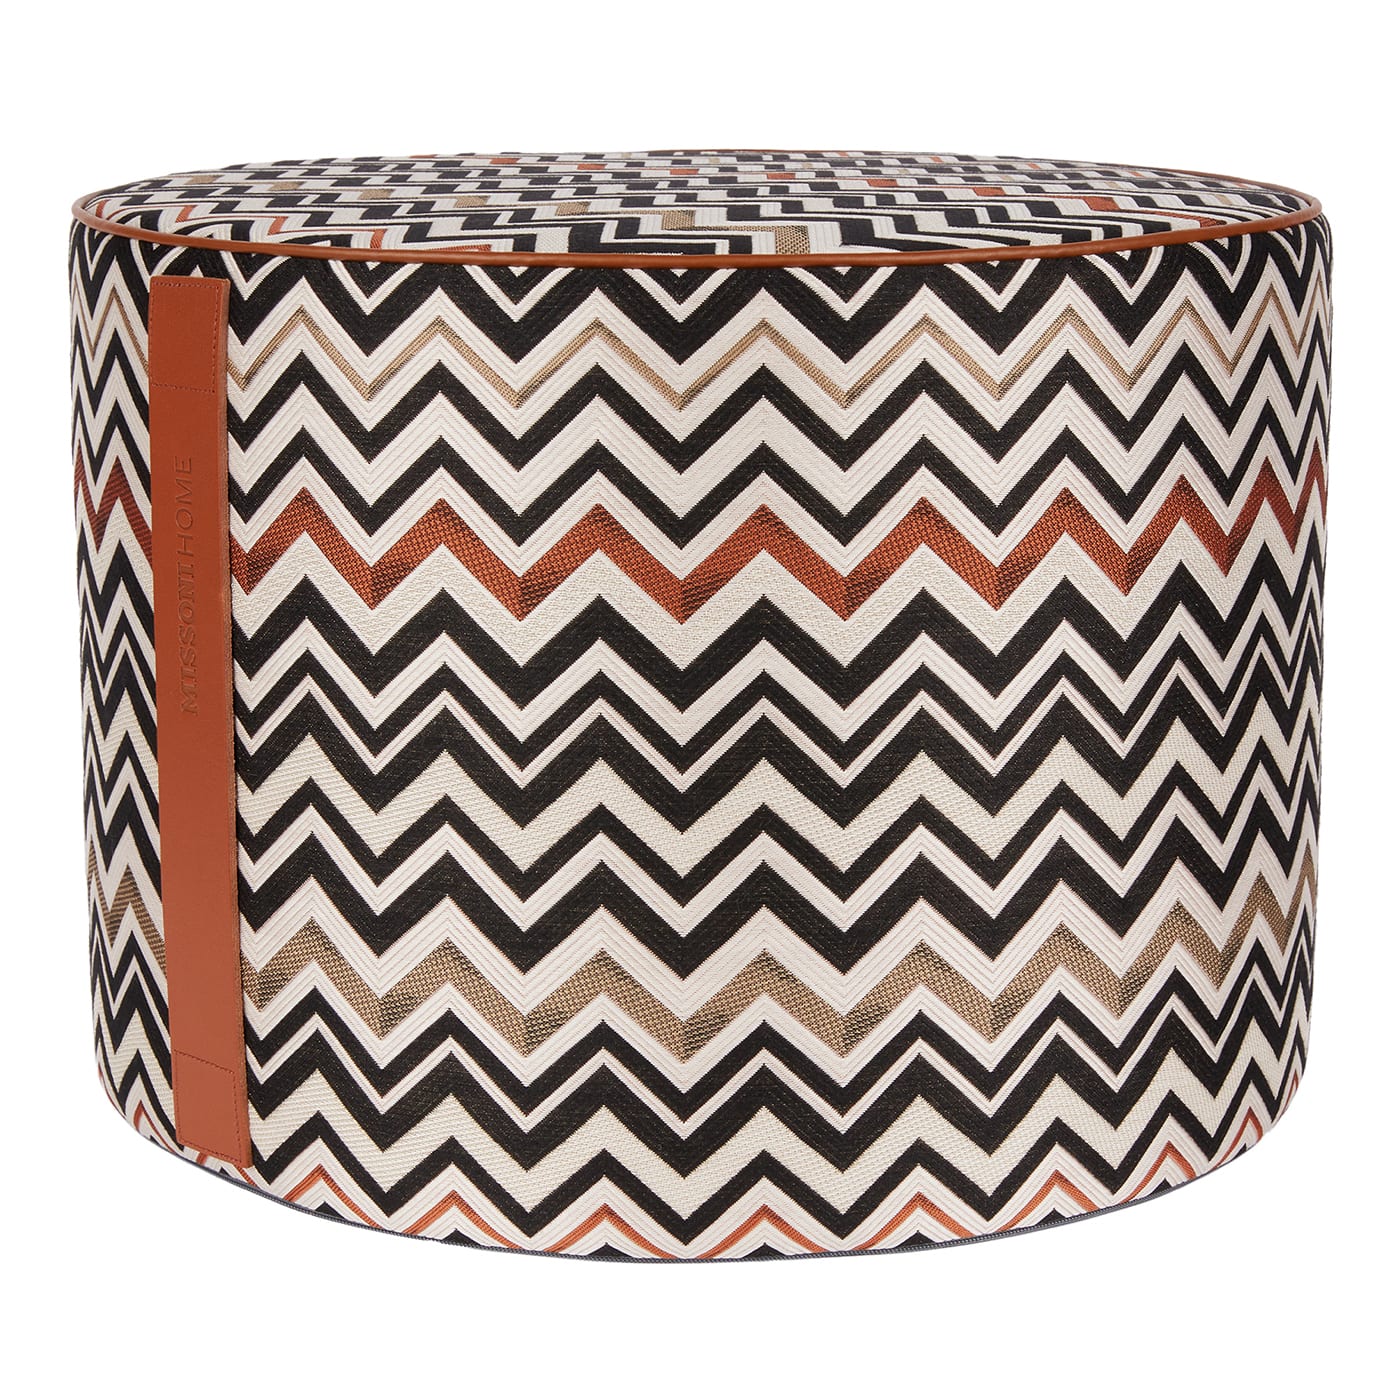 Belfast Cylindrical Pouf #1 - Missoni Home Collection